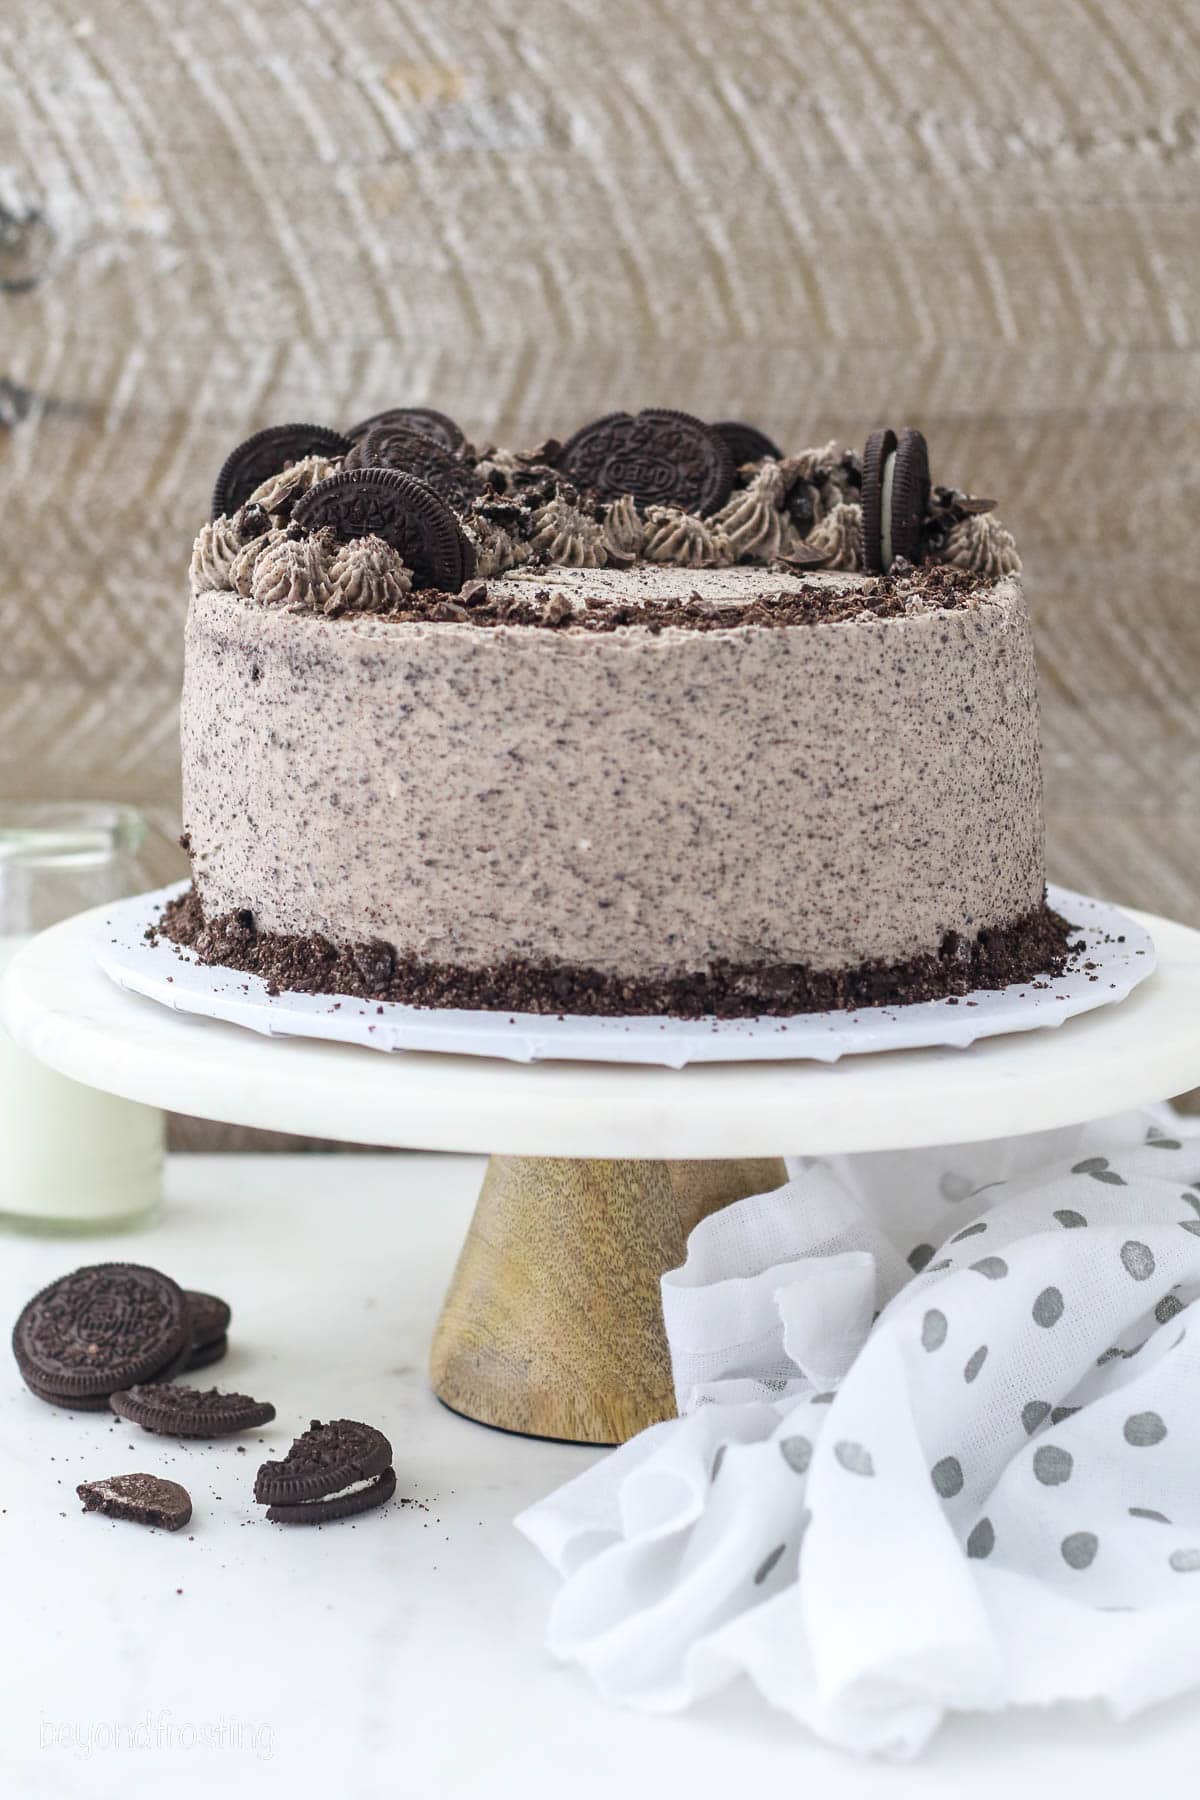 A whole frosted Oreo chocolate cake garnished with Oreo cookies on a cake stand.